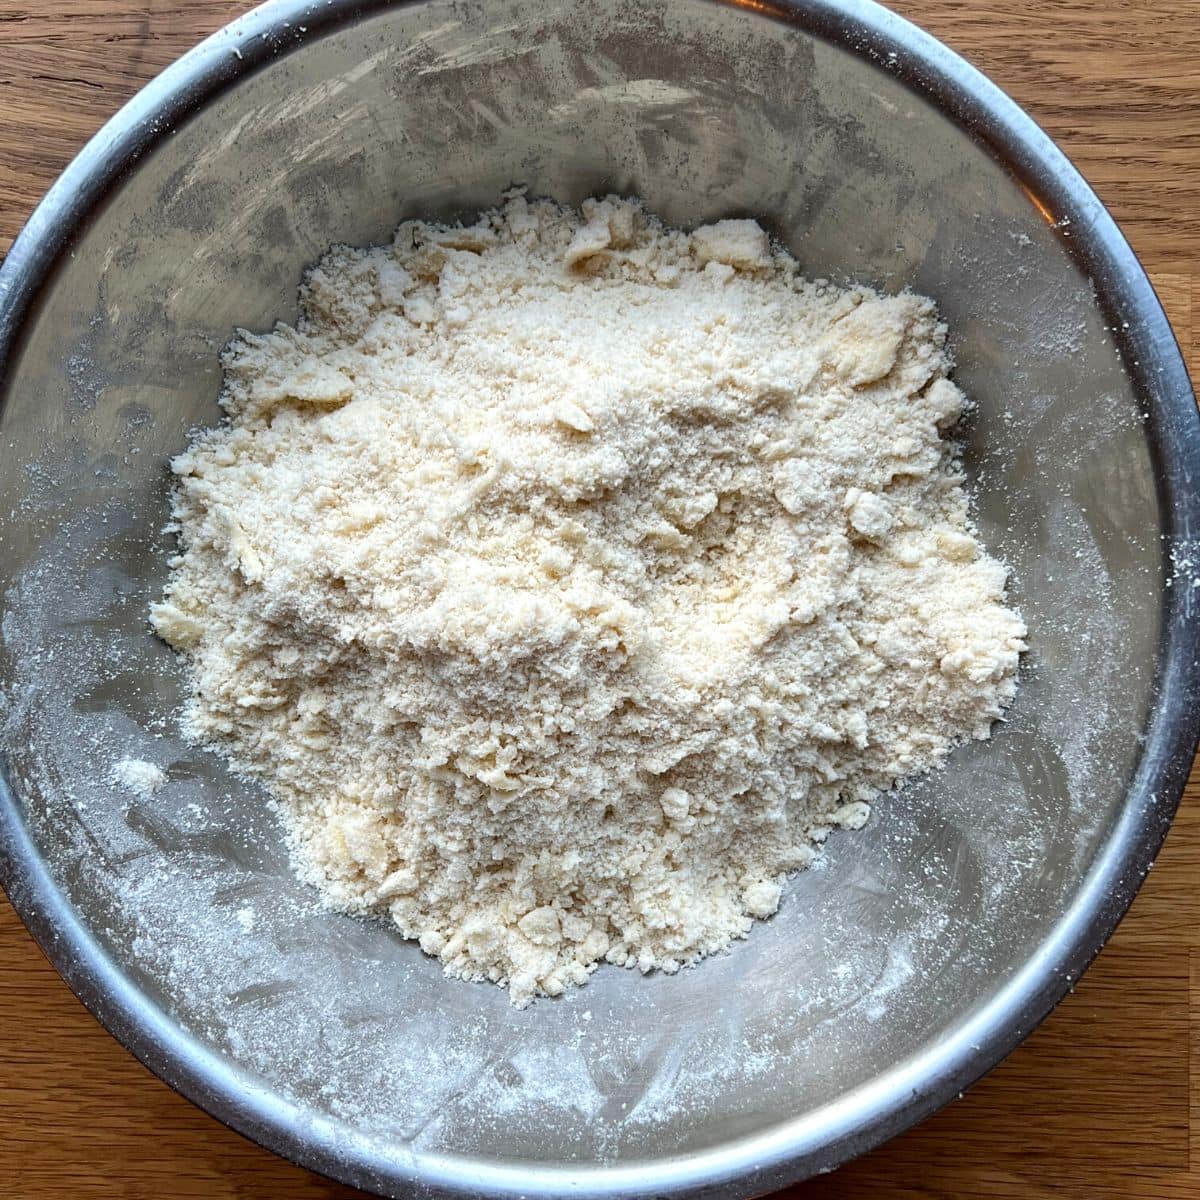 Flour mix in mixing bowl.